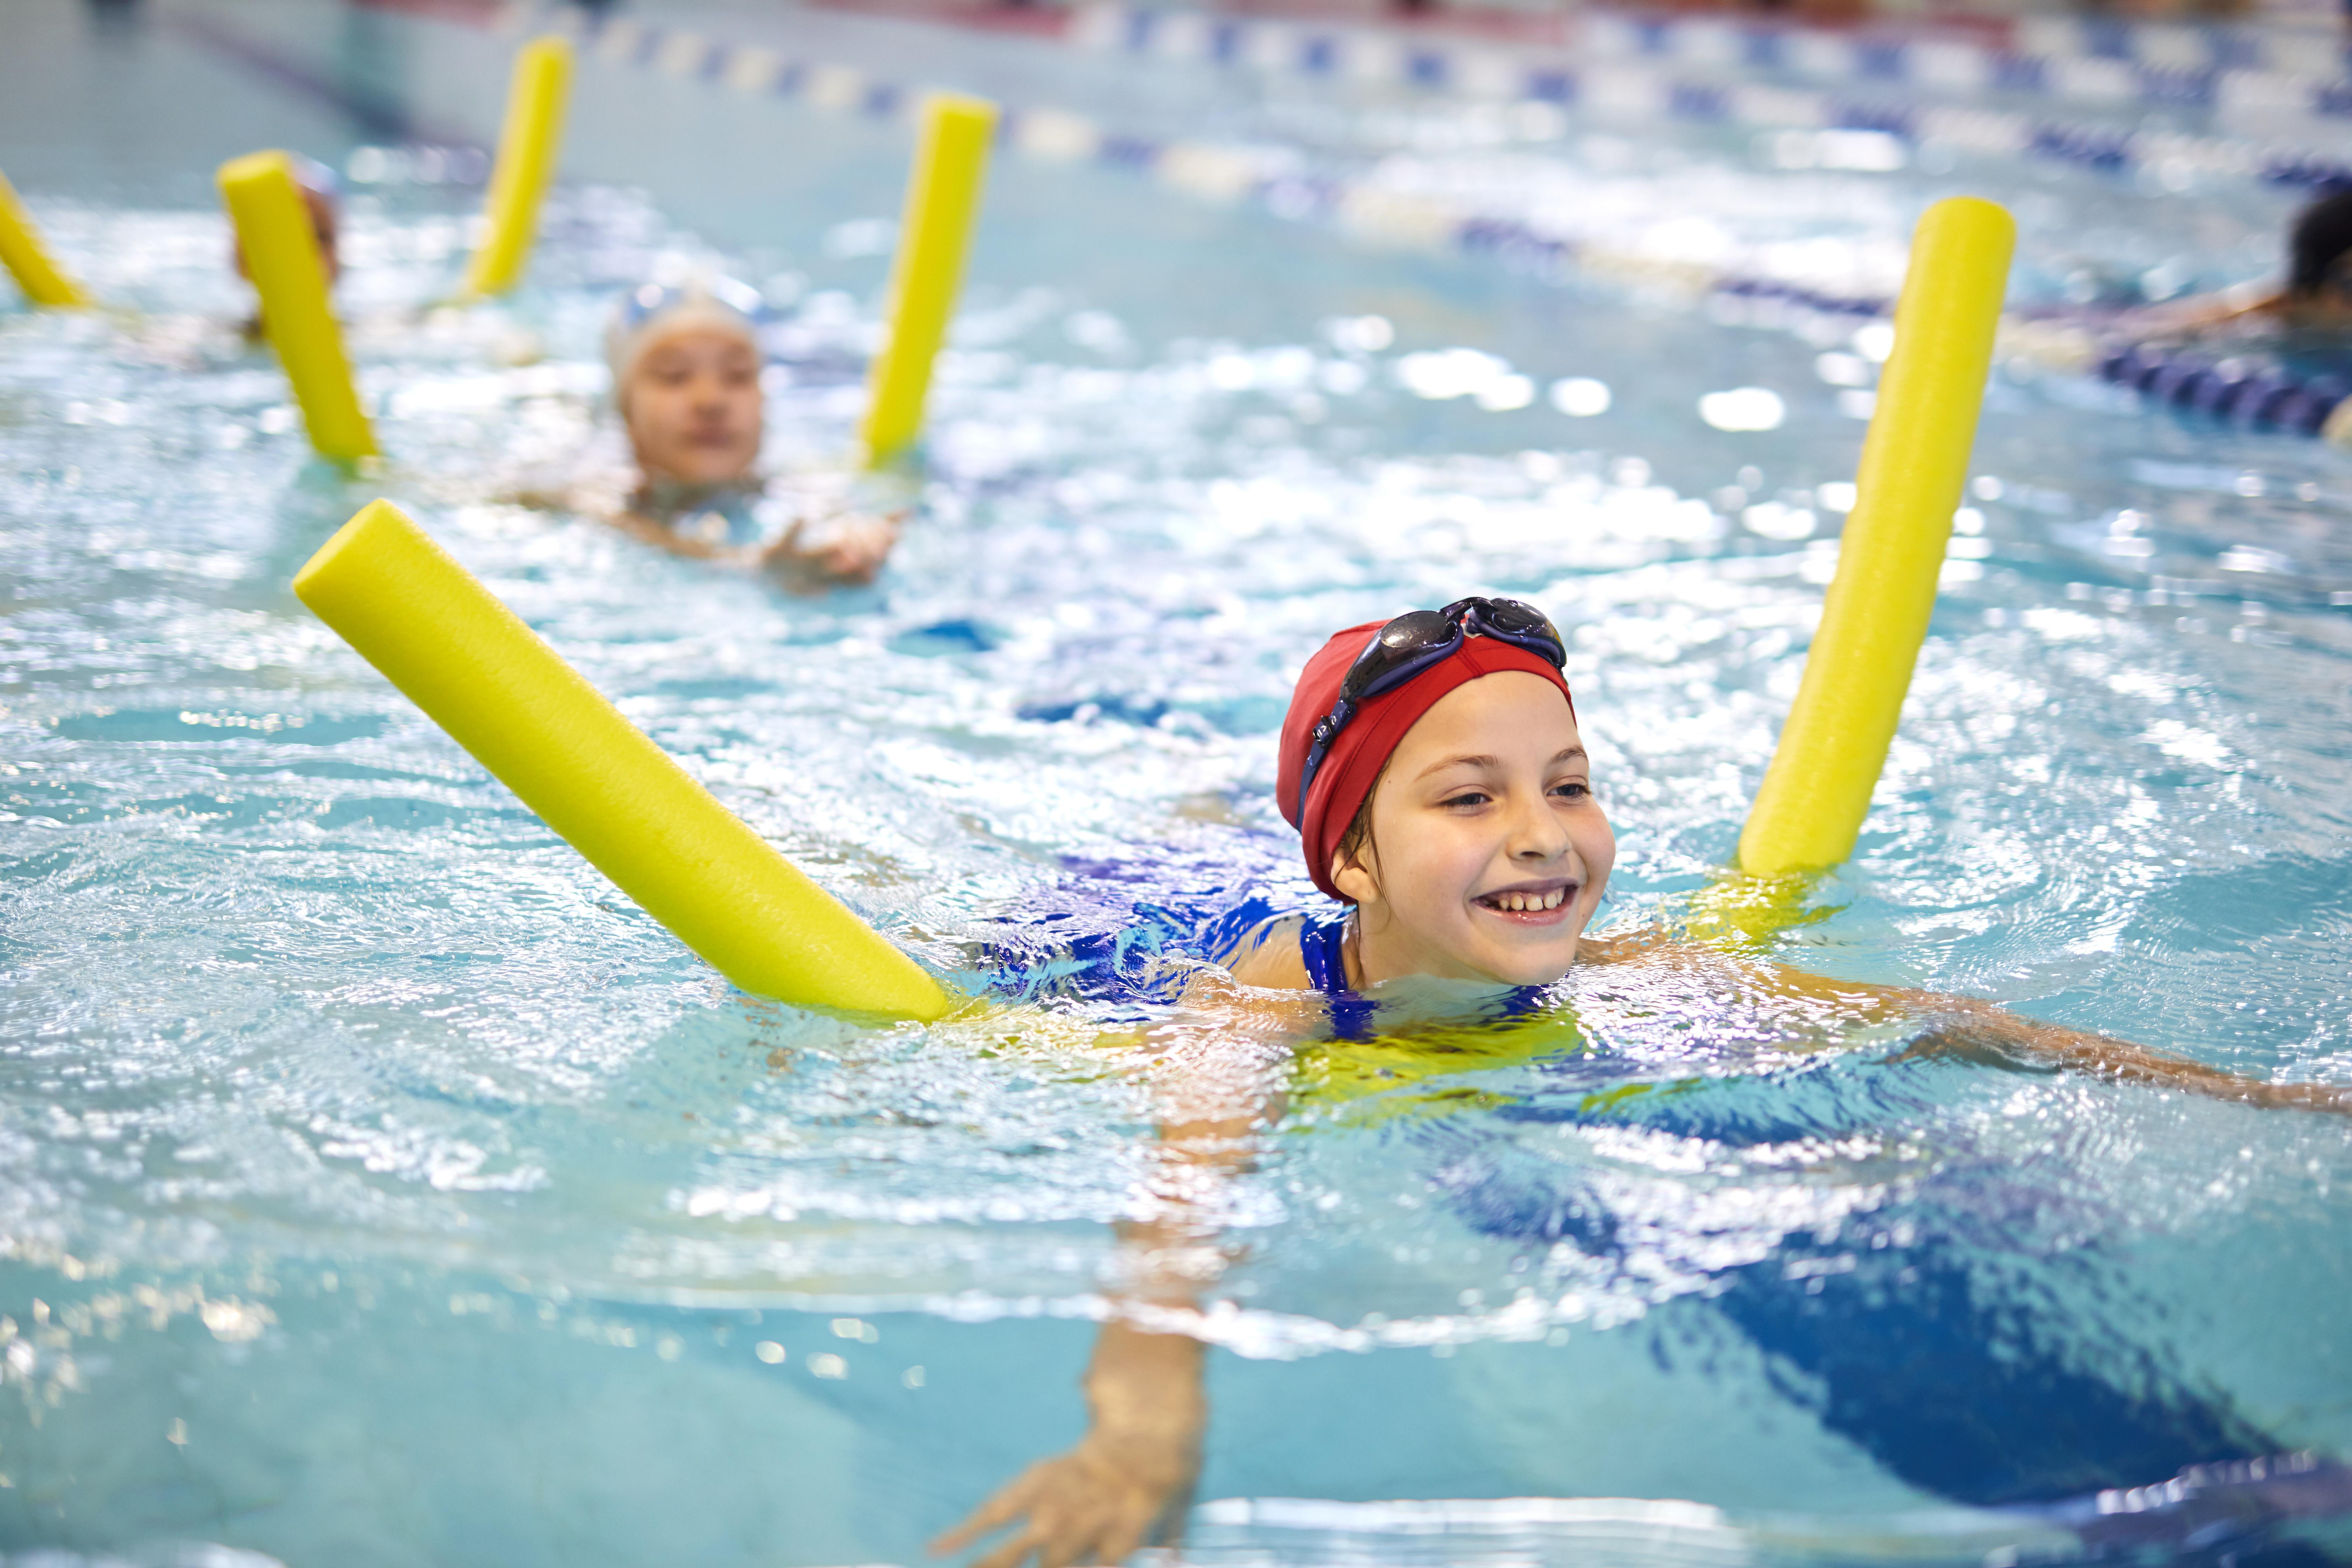 A young girl wearing a swimming hat and goggles, using a yellow float in a swimming pool